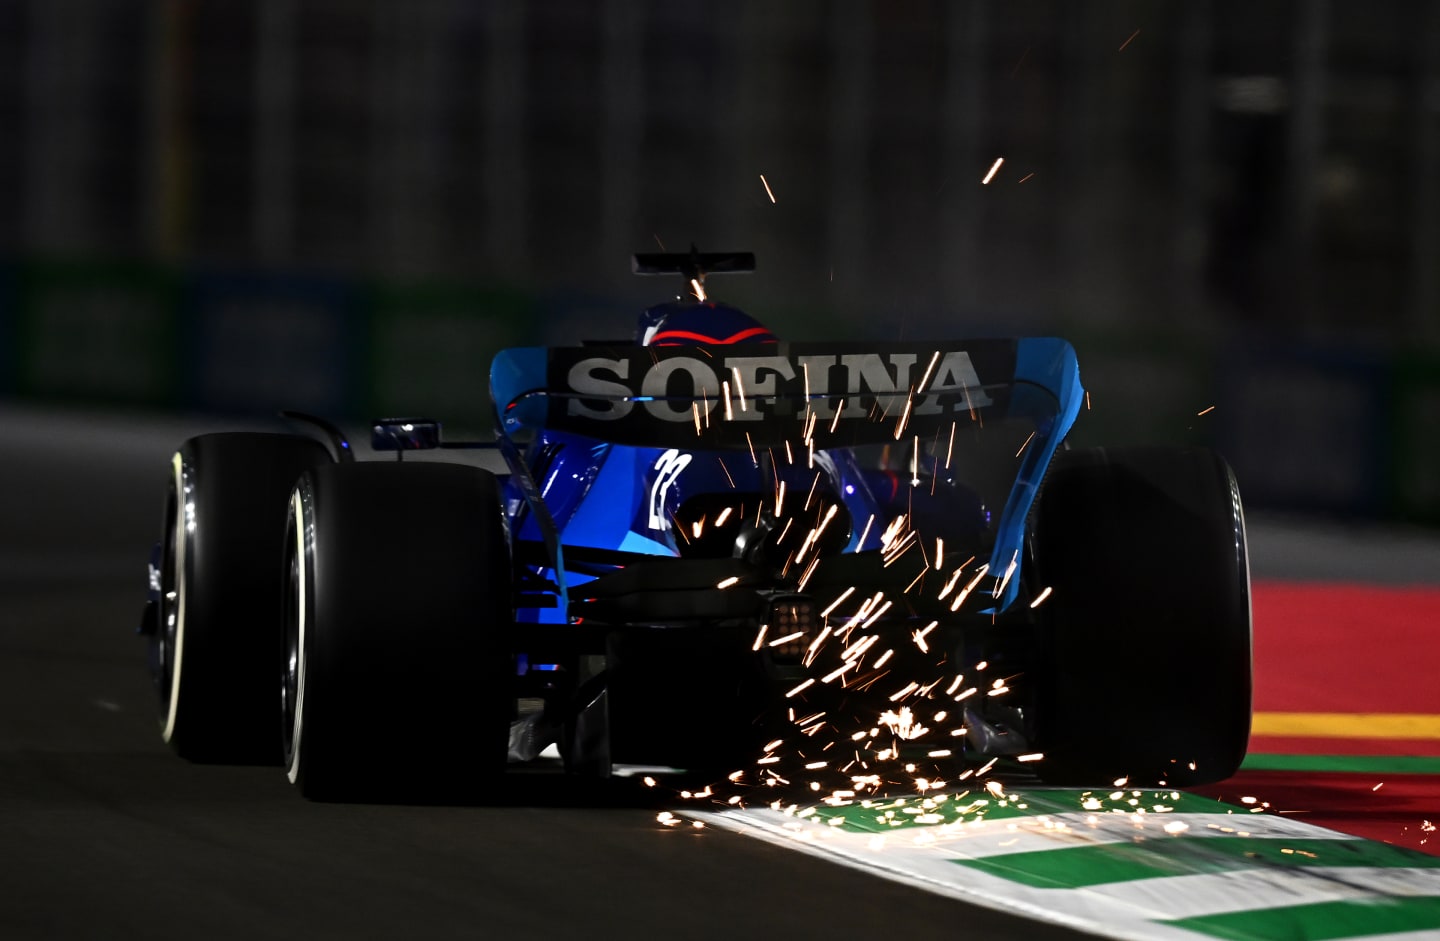 JEDDAH, SAUDI ARABIA - MARCH 25: Sparks fly behind Alexander Albon of Thailand driving the (23) Williams FW44 Mercedes on track during practice ahead of the F1 Grand Prix of Saudi Arabia at the Jeddah Corniche Circuit on March 25, 2022 in Jeddah, Saudi Arabia. (Photo by Clive Mason/Getty Images)